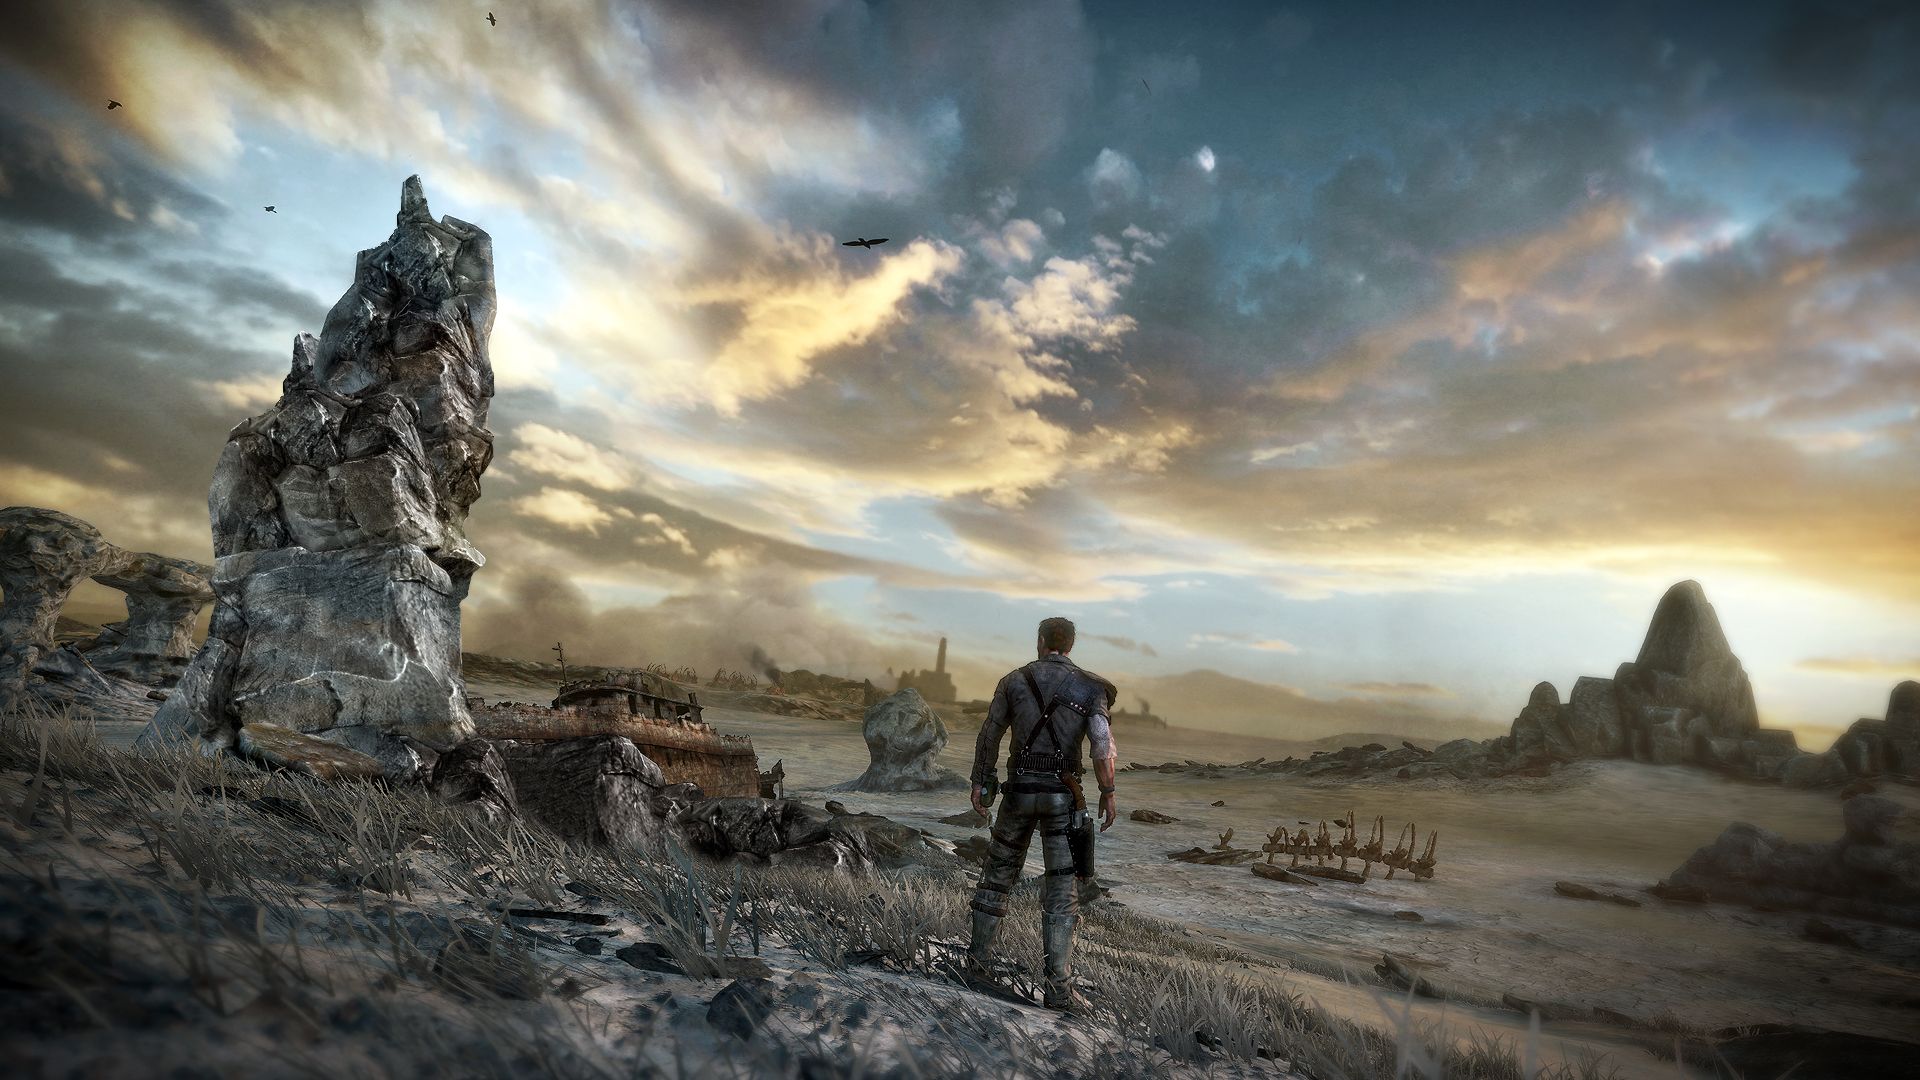 mad max iphone wallpaper,sky,cg artwork,action adventure game,soldier,landscape